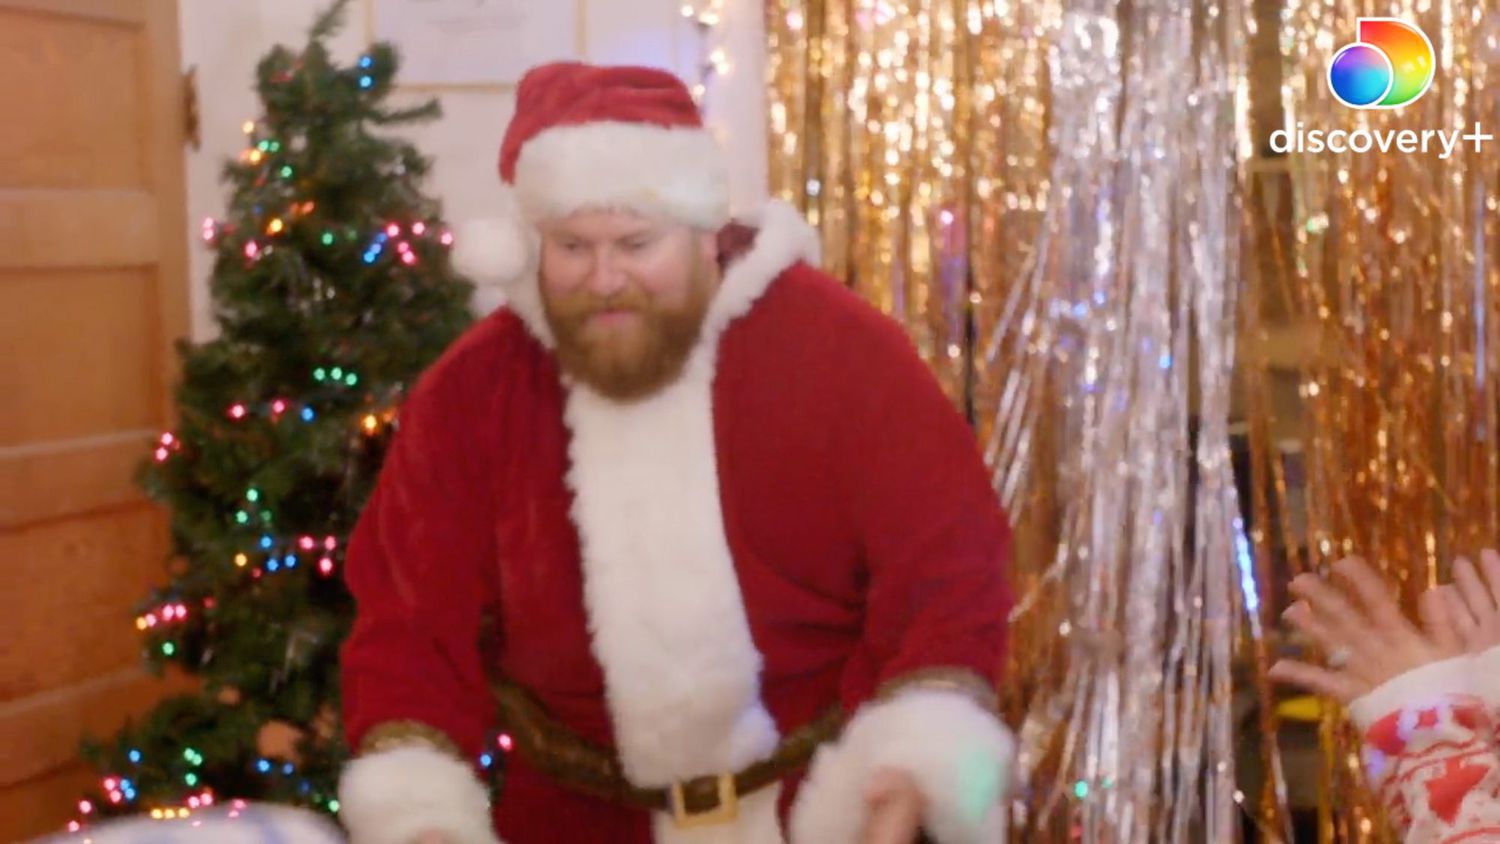 WATCH: Ben Napier Delivers Christmas Cheer as Santa Claus in Home Town Holiday Special Trailer